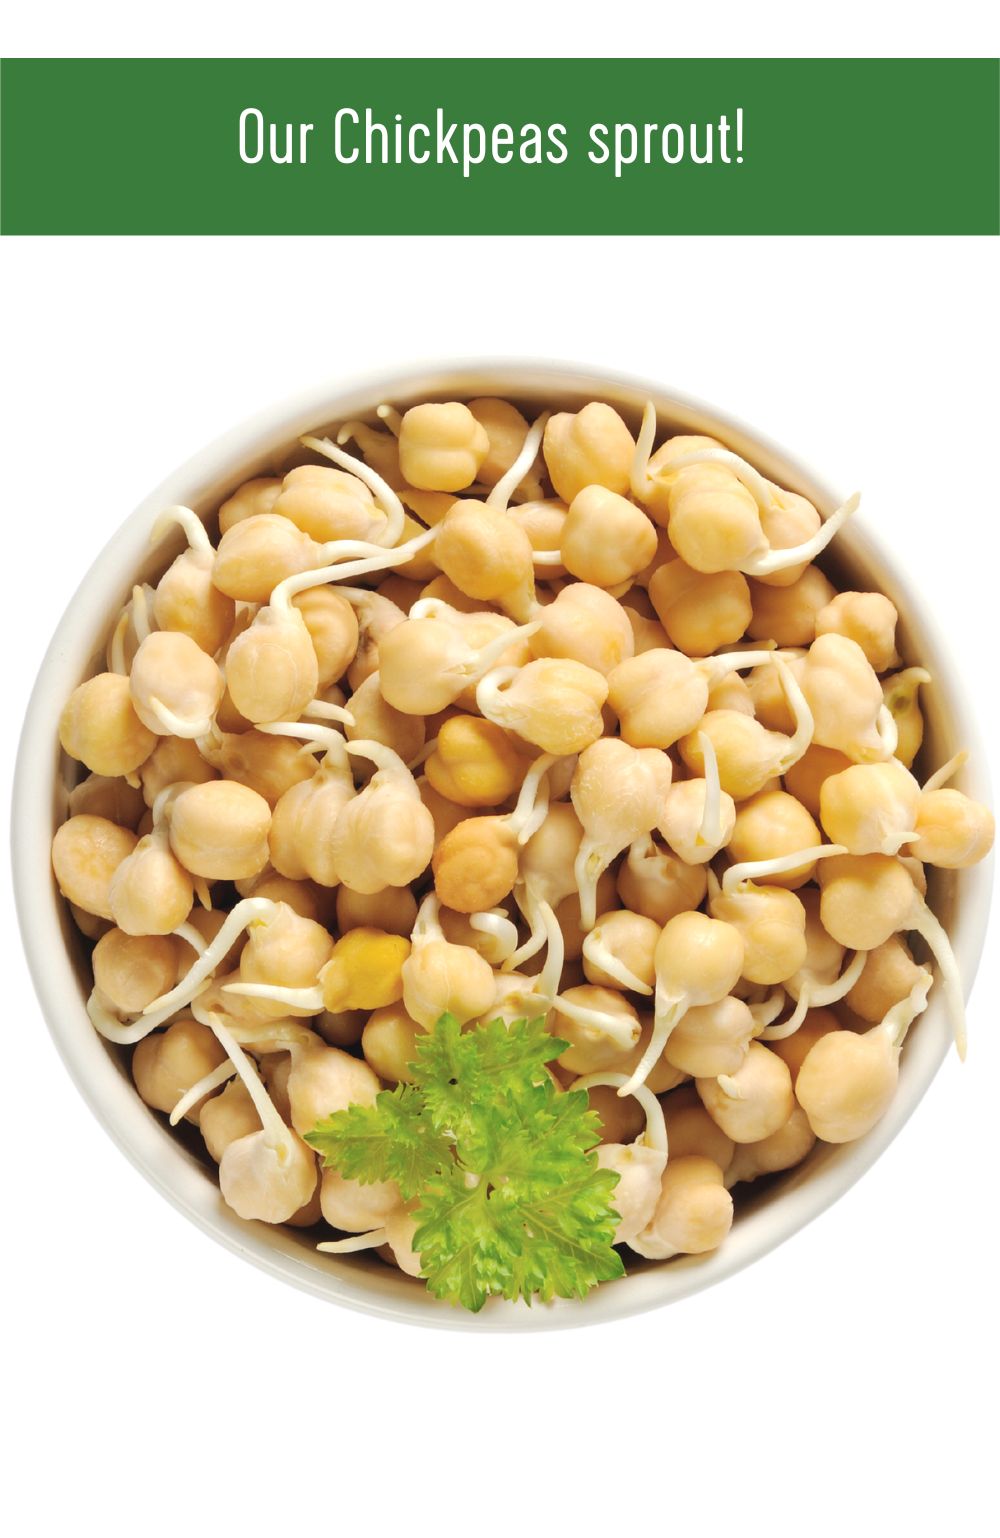 How to Sprout Washington State Grown Chickpeas, Green Split Peas, and Brown Lentils